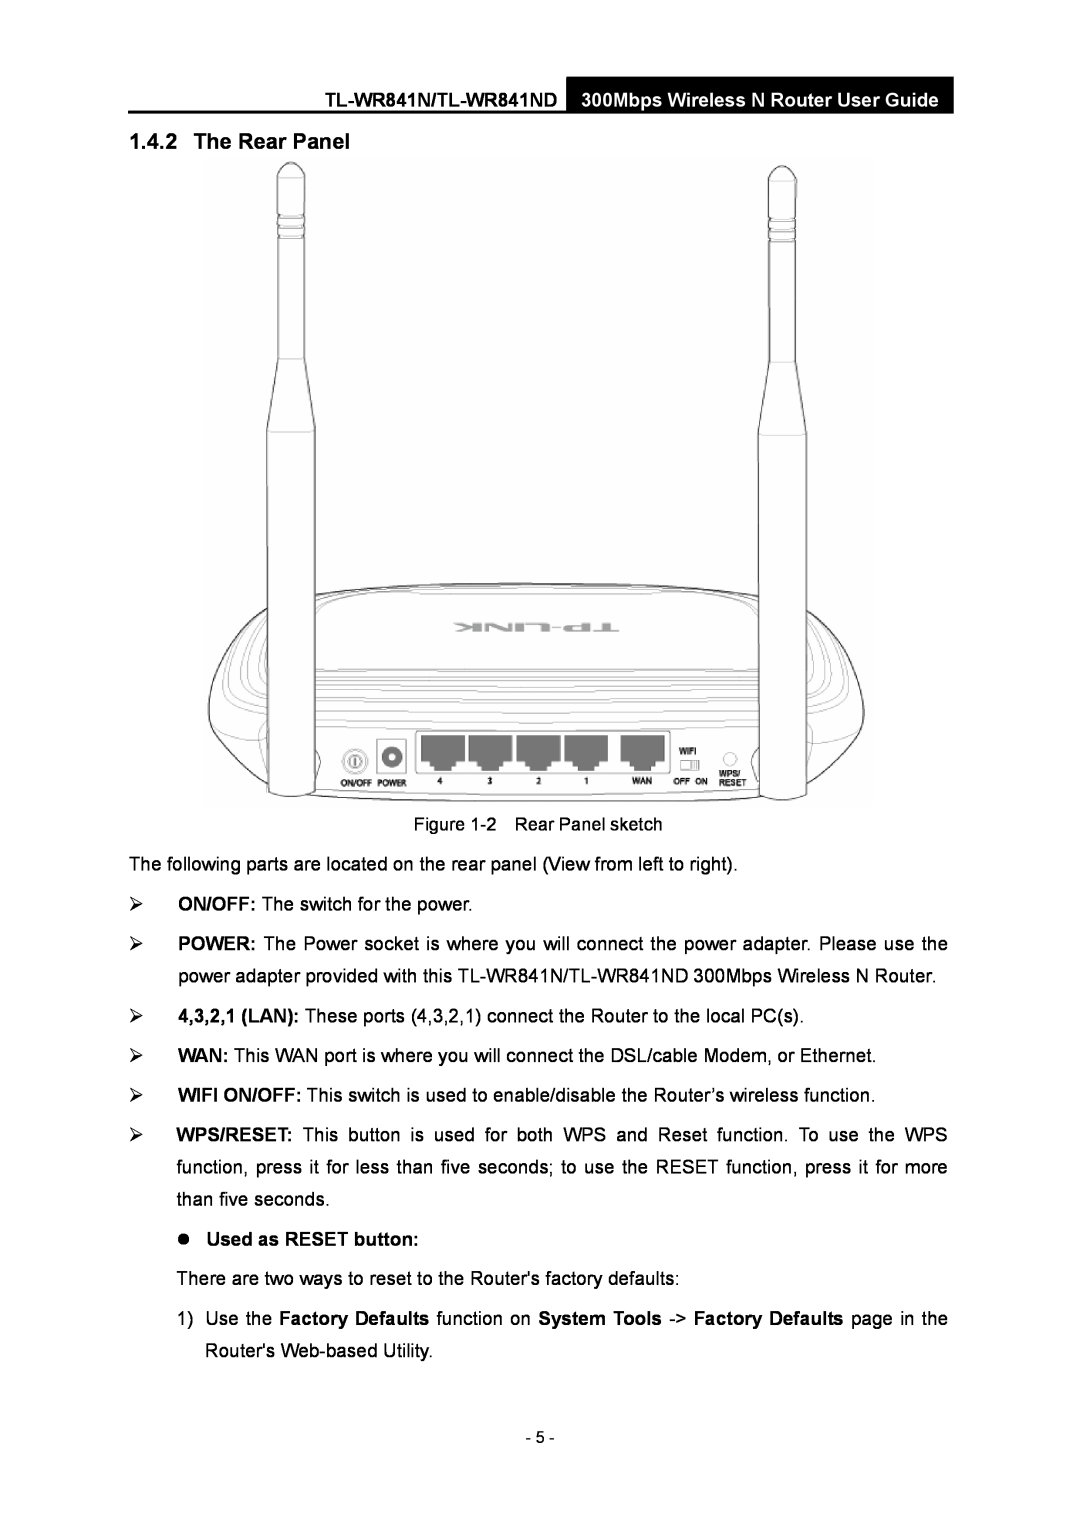 TP-Link manual The Rear Panel, z Used as RESET button, TL-WR841N/TL-WR841ND 300Mbps Wireless N Router User Guide 